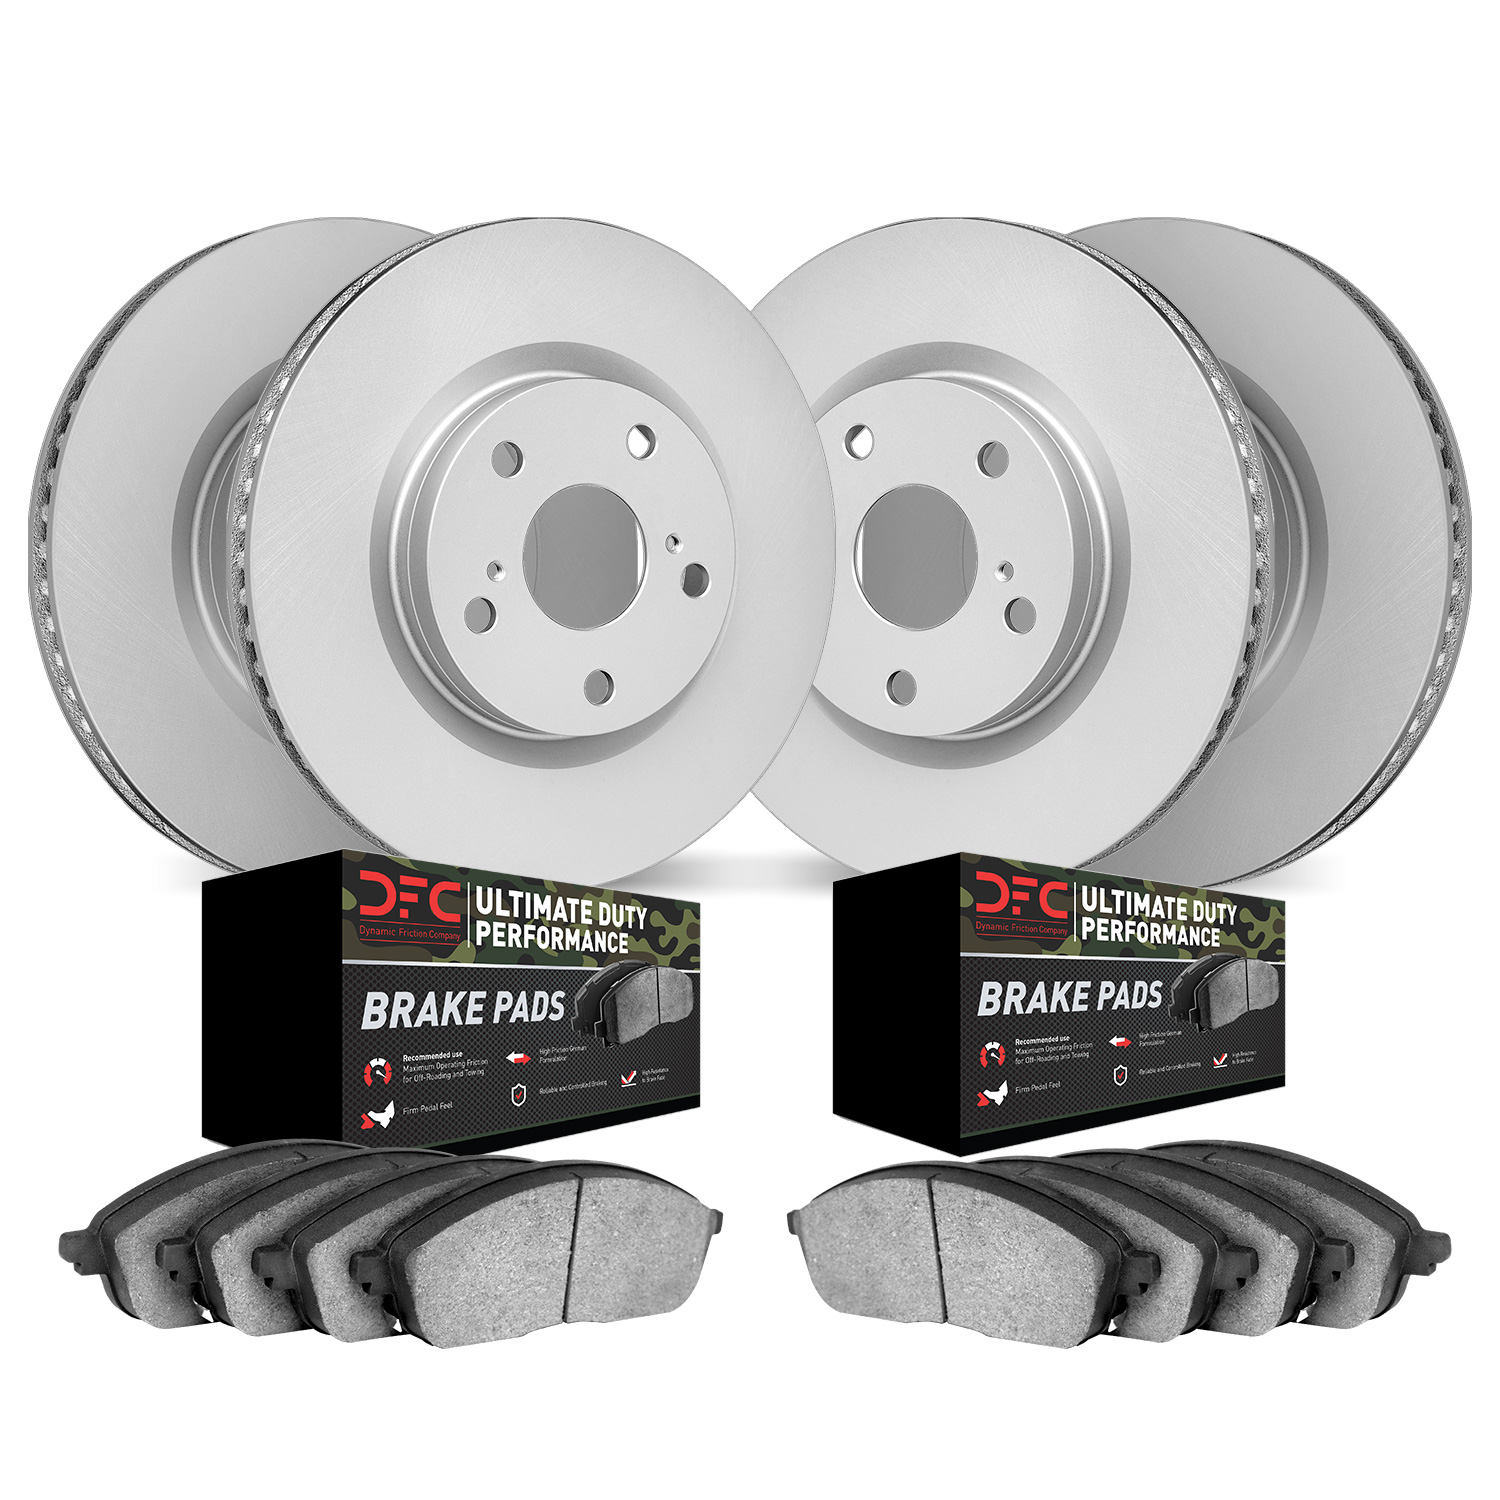 4404-40002 Geospec Brake Rotors with Ultimate-Duty Brake Pads Kit, 2006-2018 Mopar, Position: Front and Rear